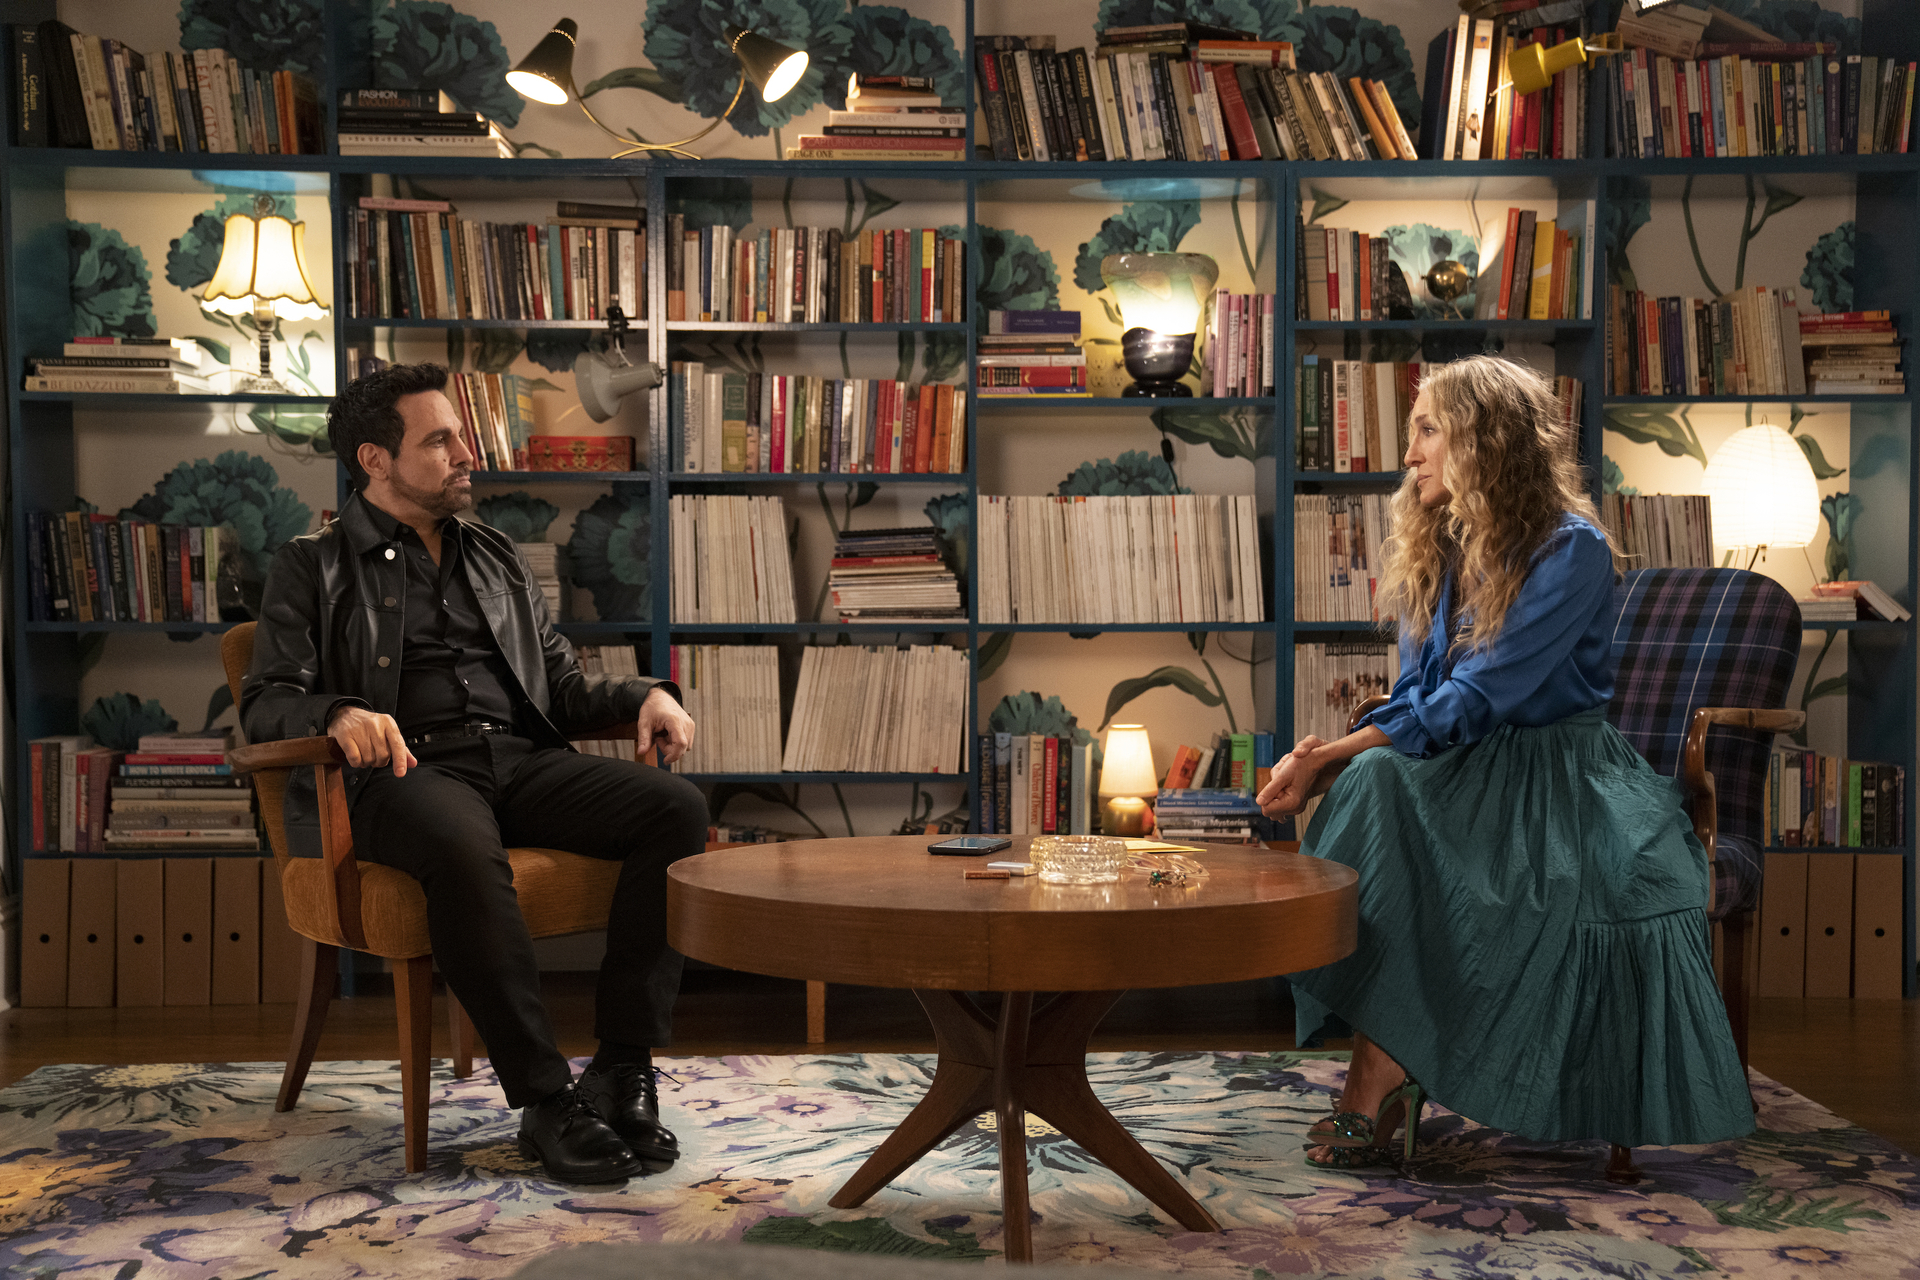 Mario Cantone and Sarah Jessica Parker in Carrie's apartment in HBO Max's <i>And Just Like That...</i>